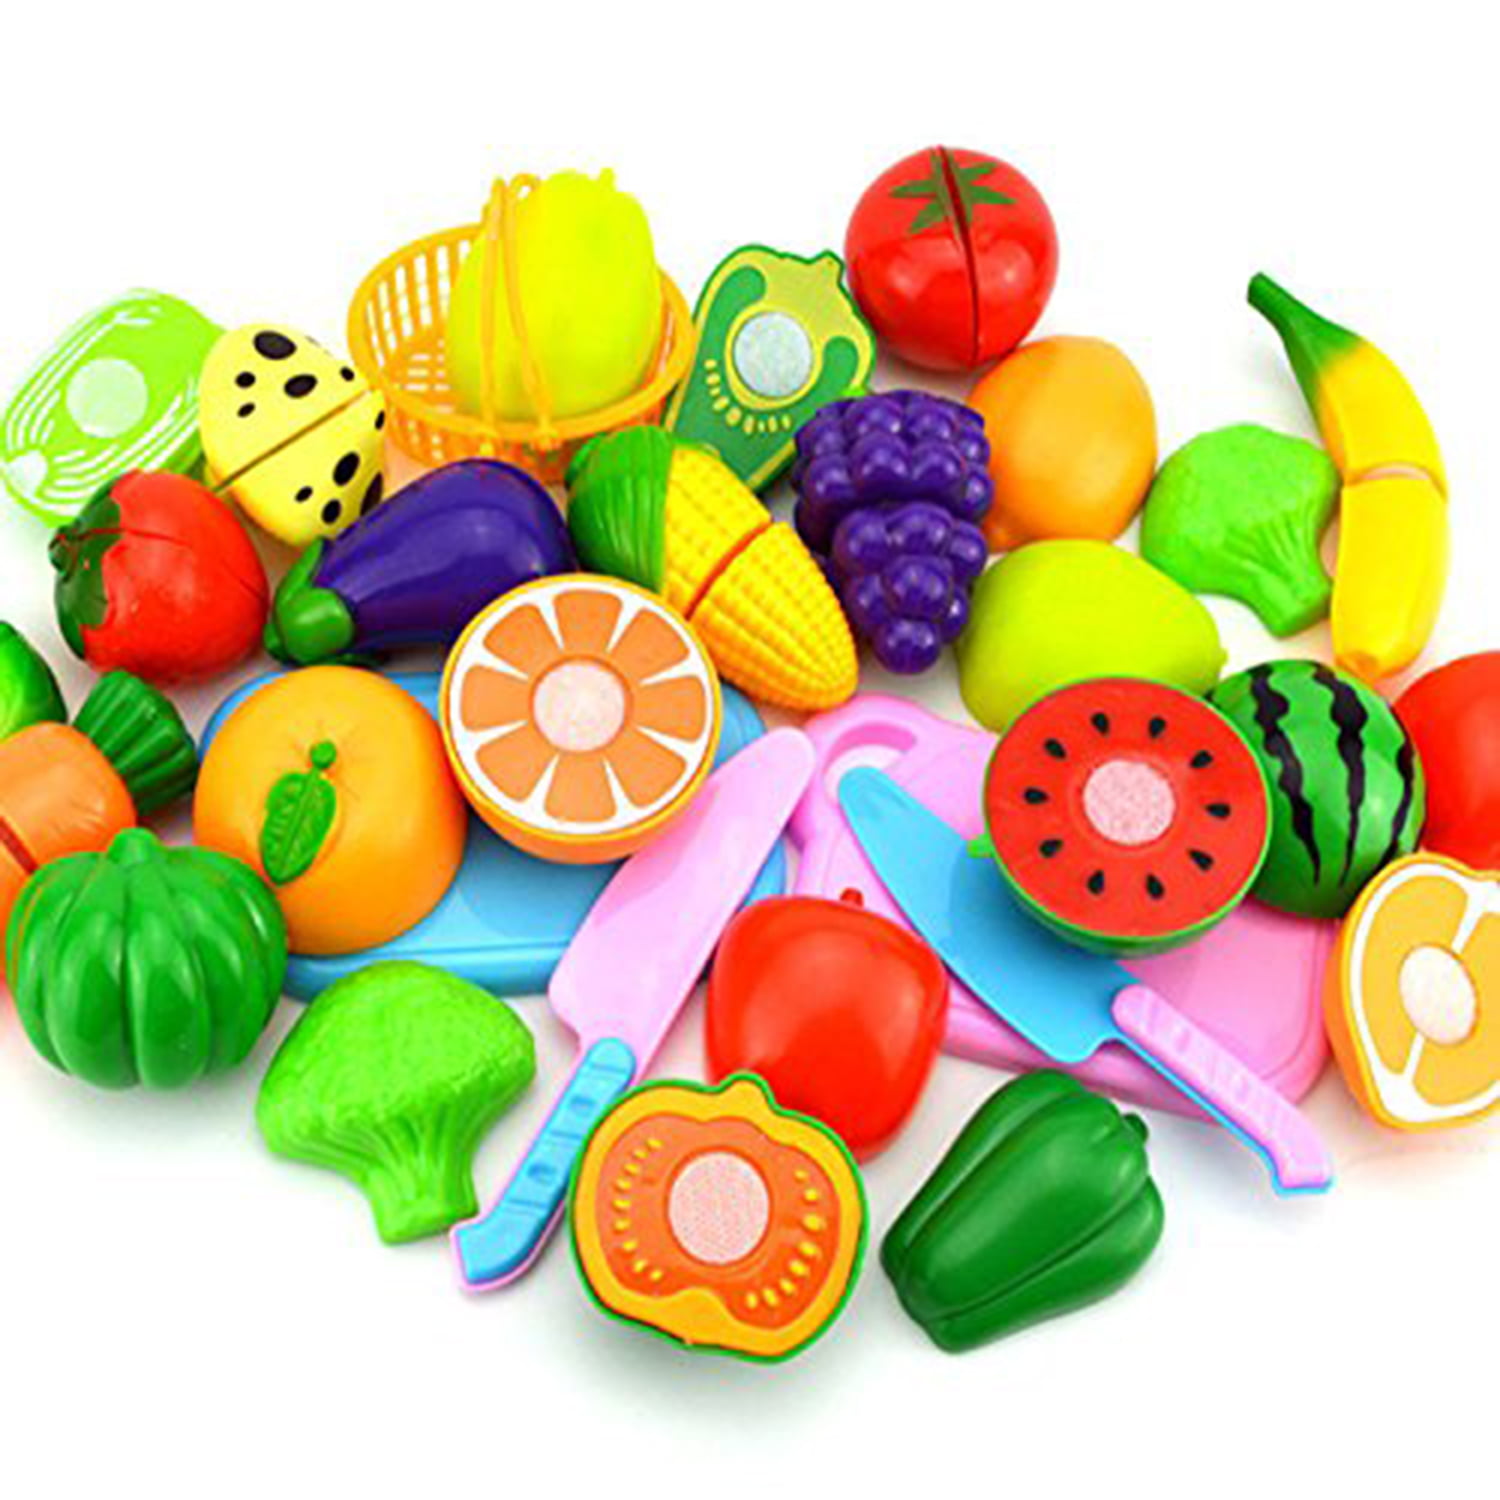 Toy Play Fruit Food Pretend Vegetable Kitchen Cutting Set Role Kids Child GODUK 